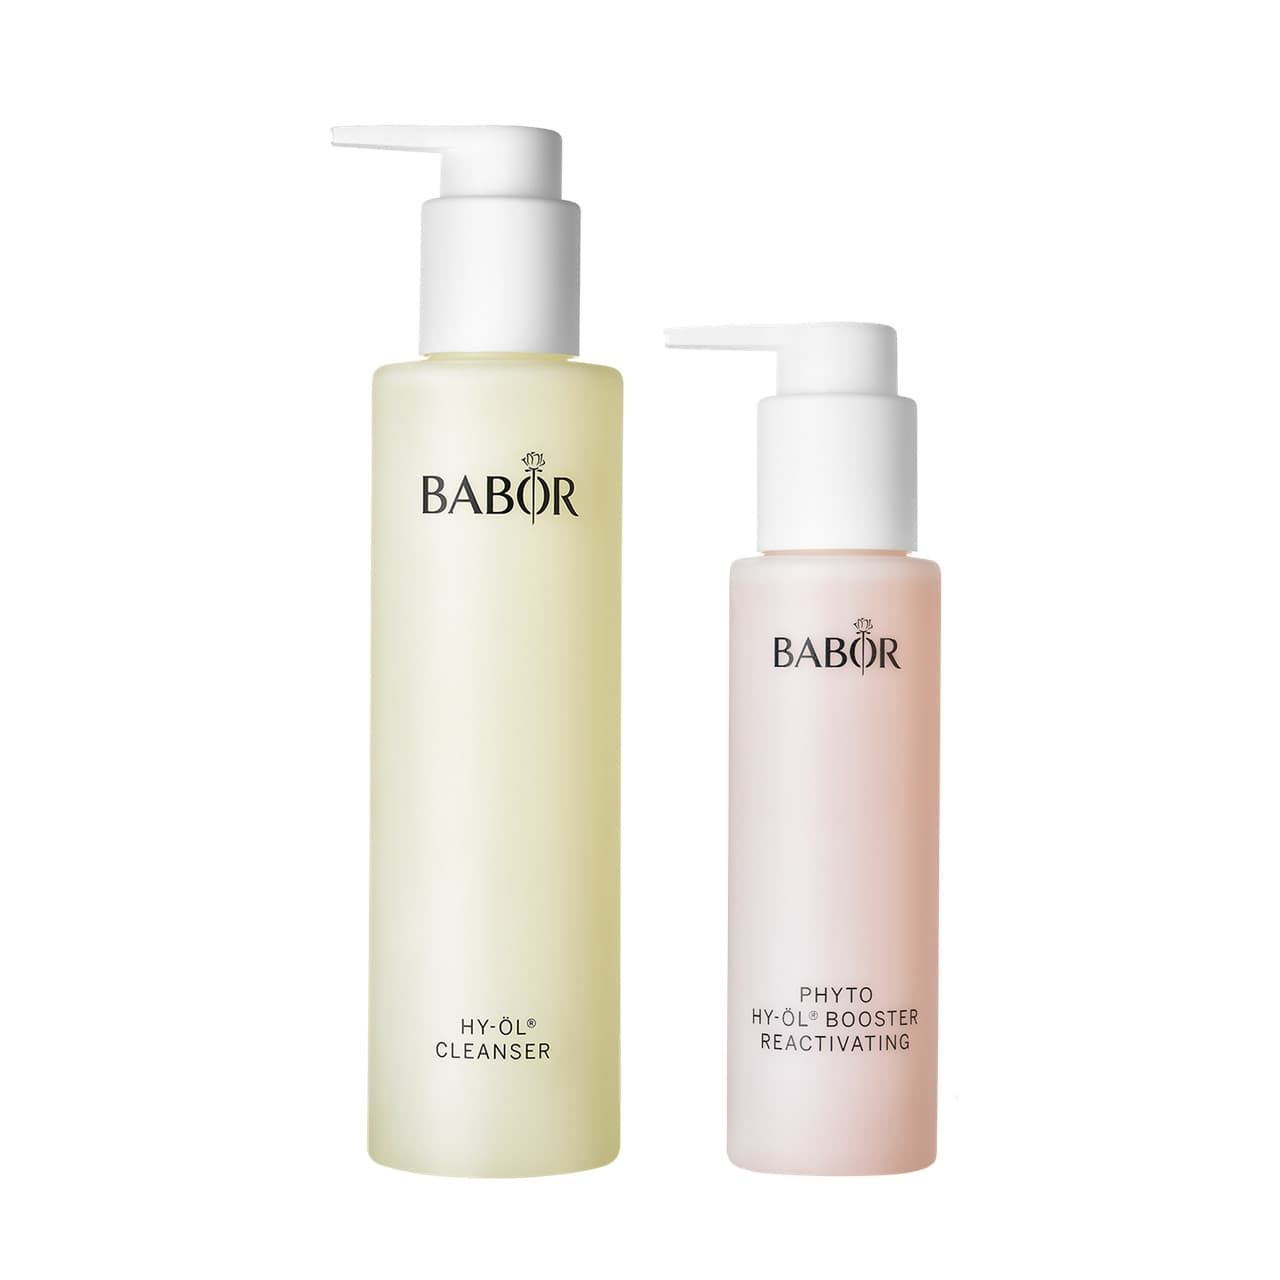 BABOR DUO : HY-ÖL CLEANSER & PHYTO HY-ÖL BOOSTER REACTIVATING SET - Imagen 1